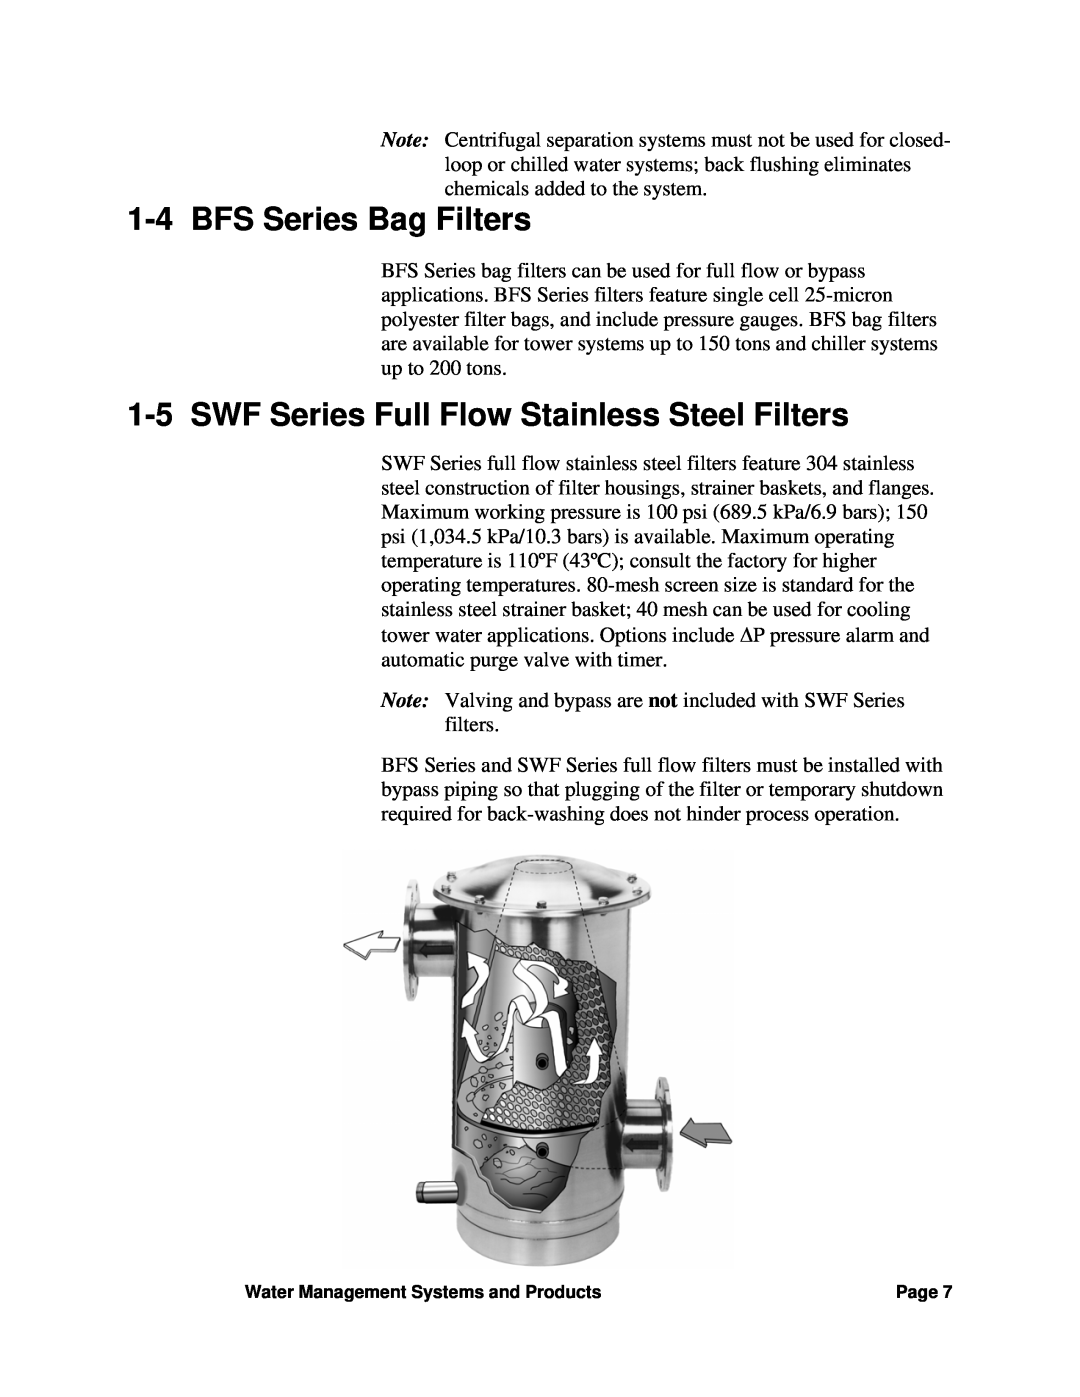 Sterling SGM-250A manual 1-4BFS Series Bag Filters, 1-5SWF Series Full Flow Stainless Steel Filters 